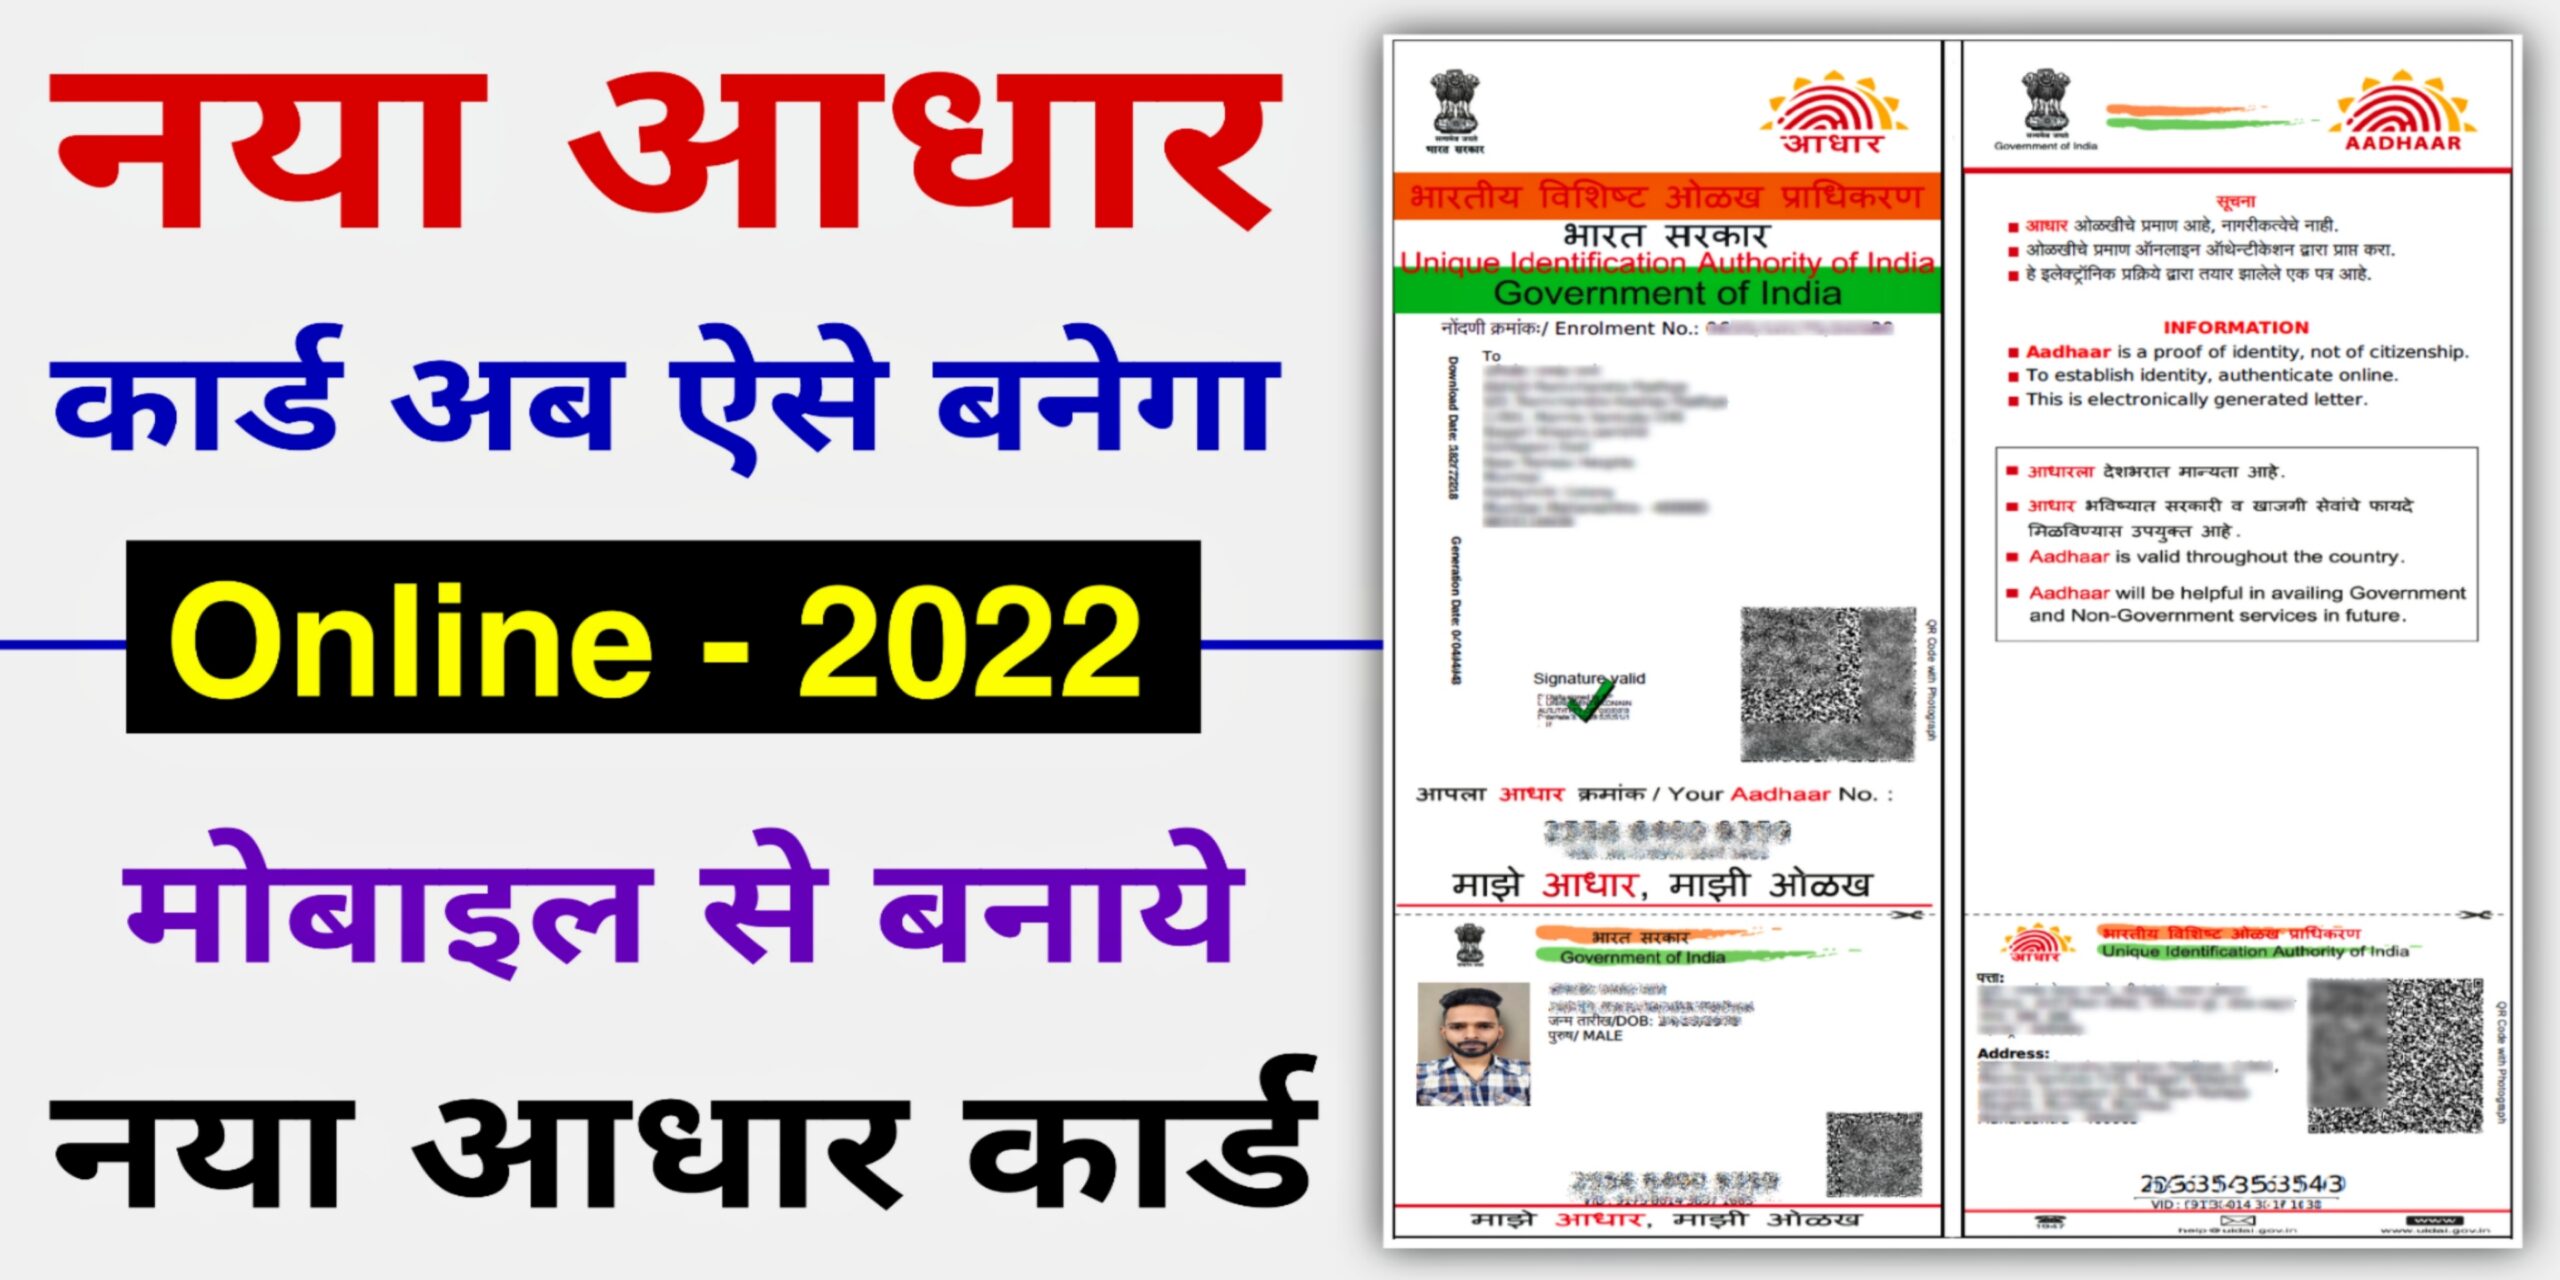 Online Apply for New Aadhar Card